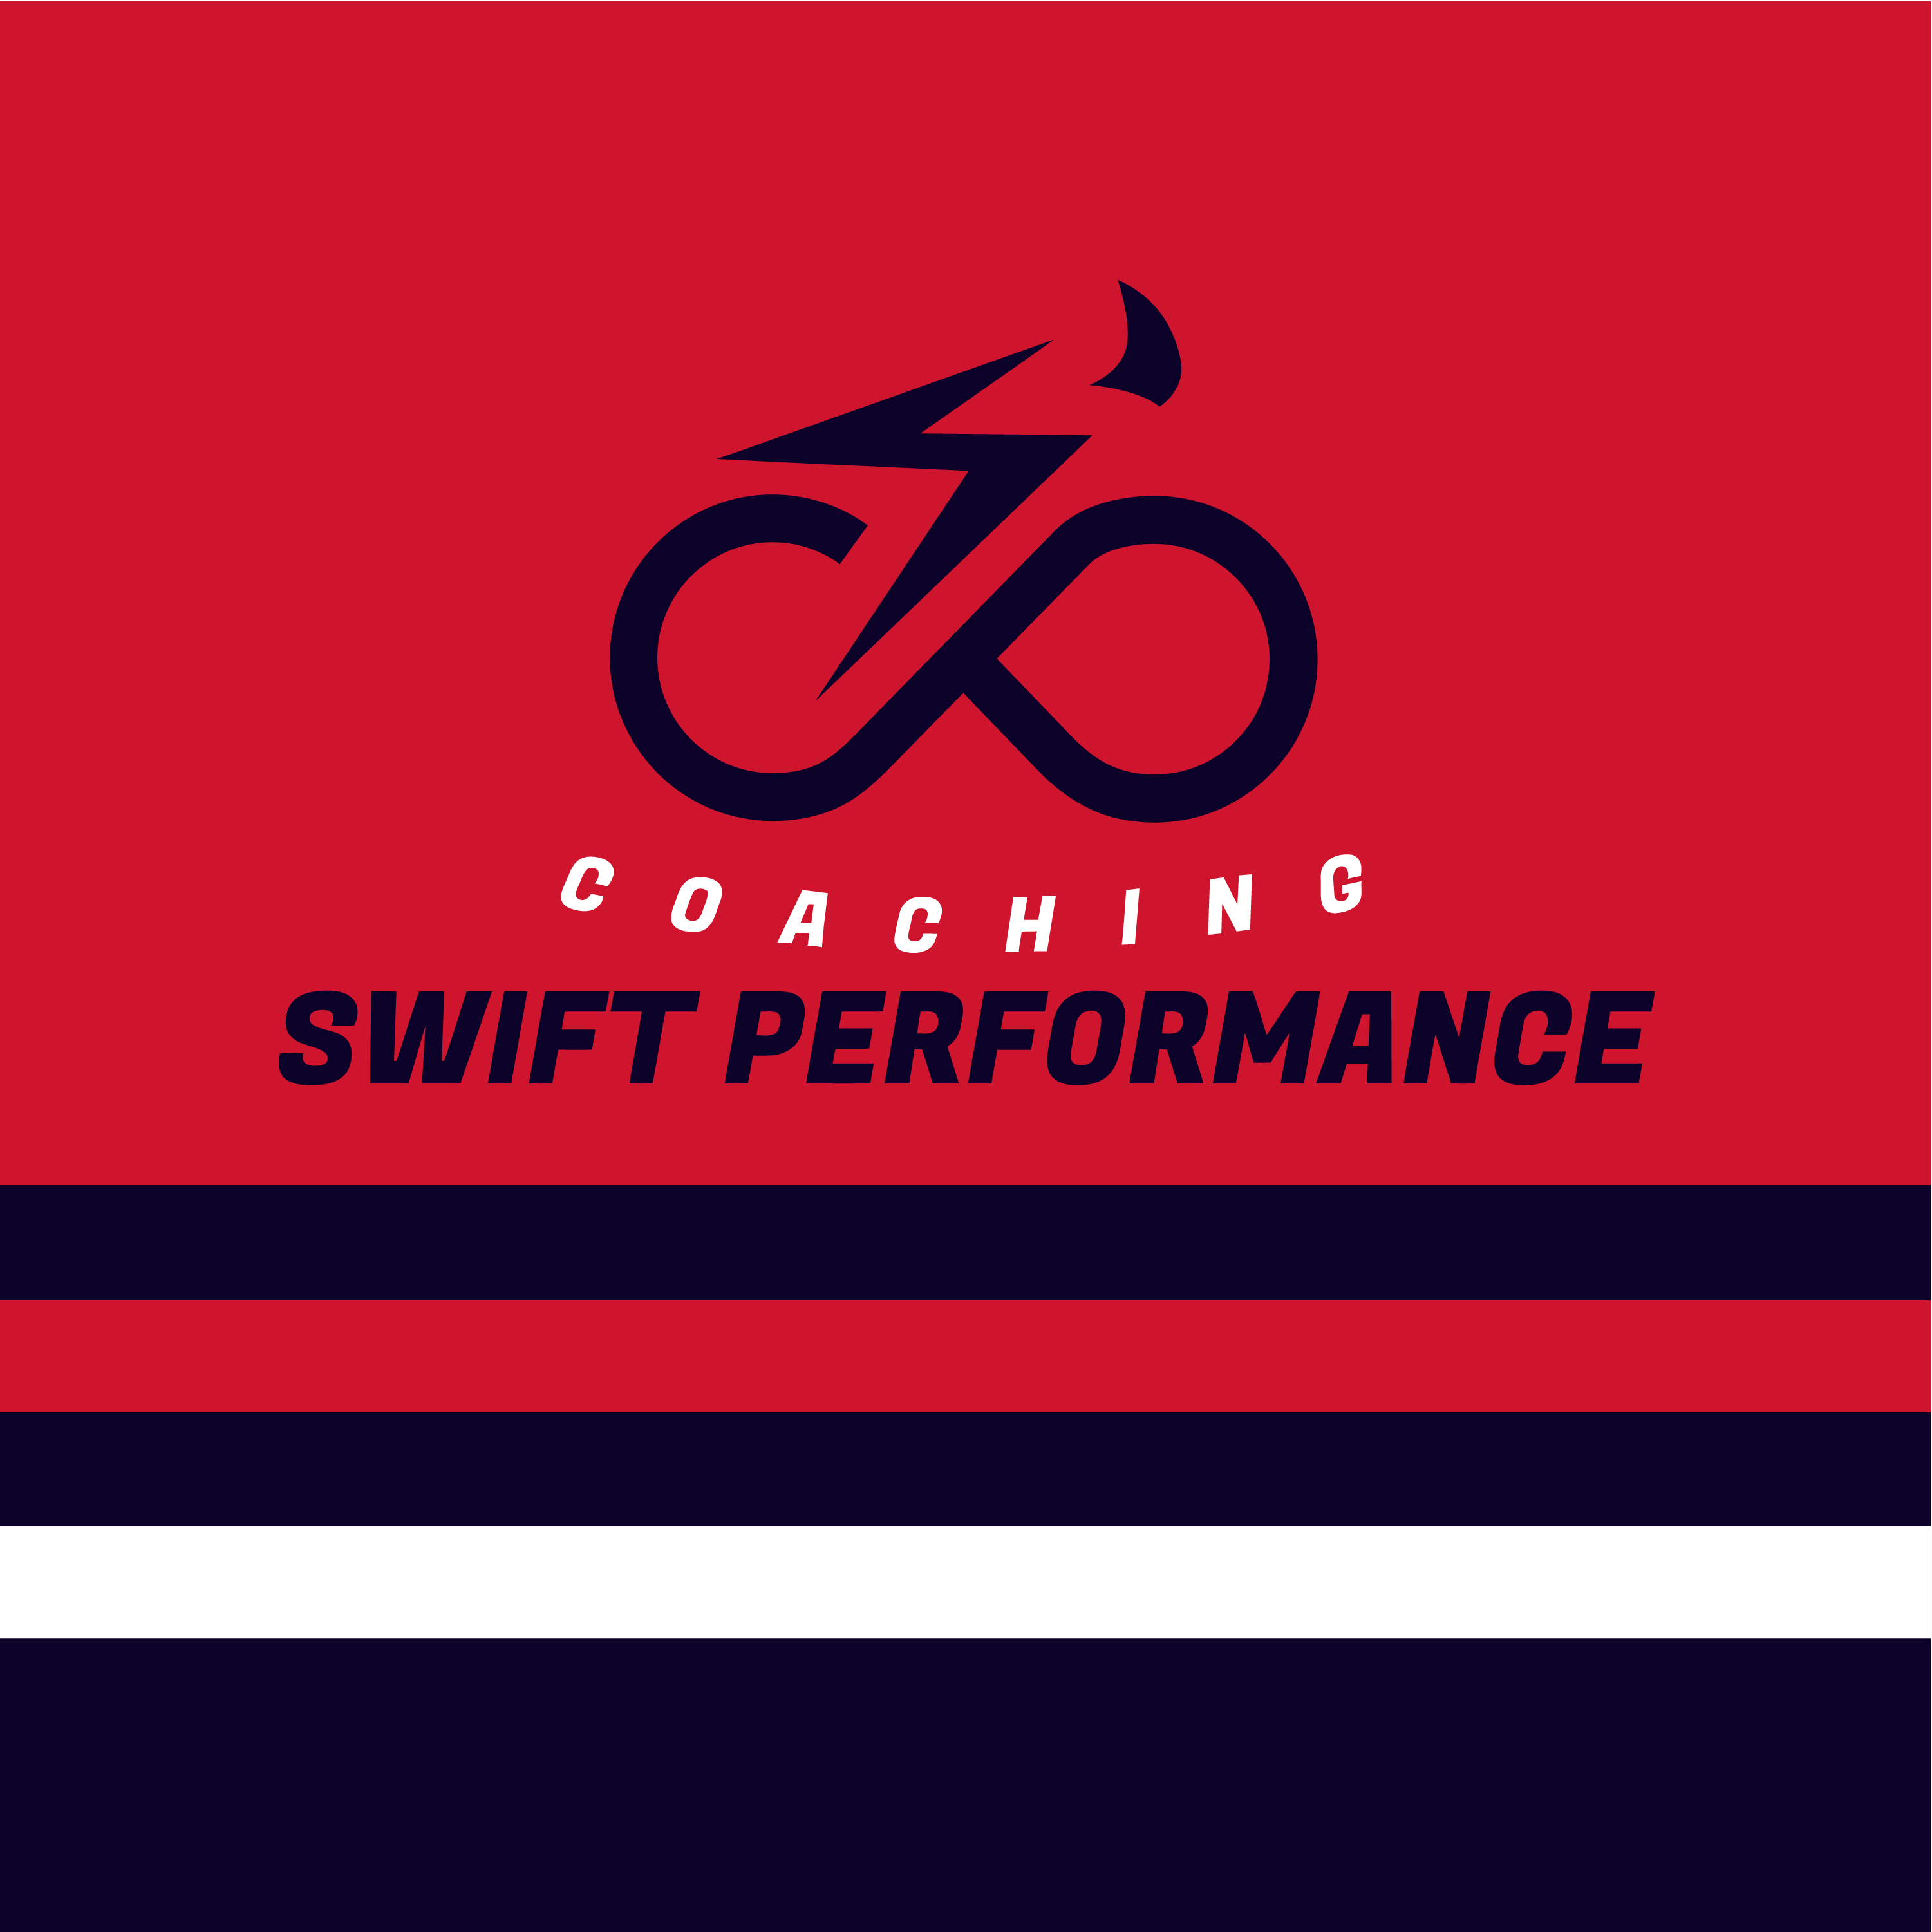 Club Image for SWIFT PERFORMANCE COACHING